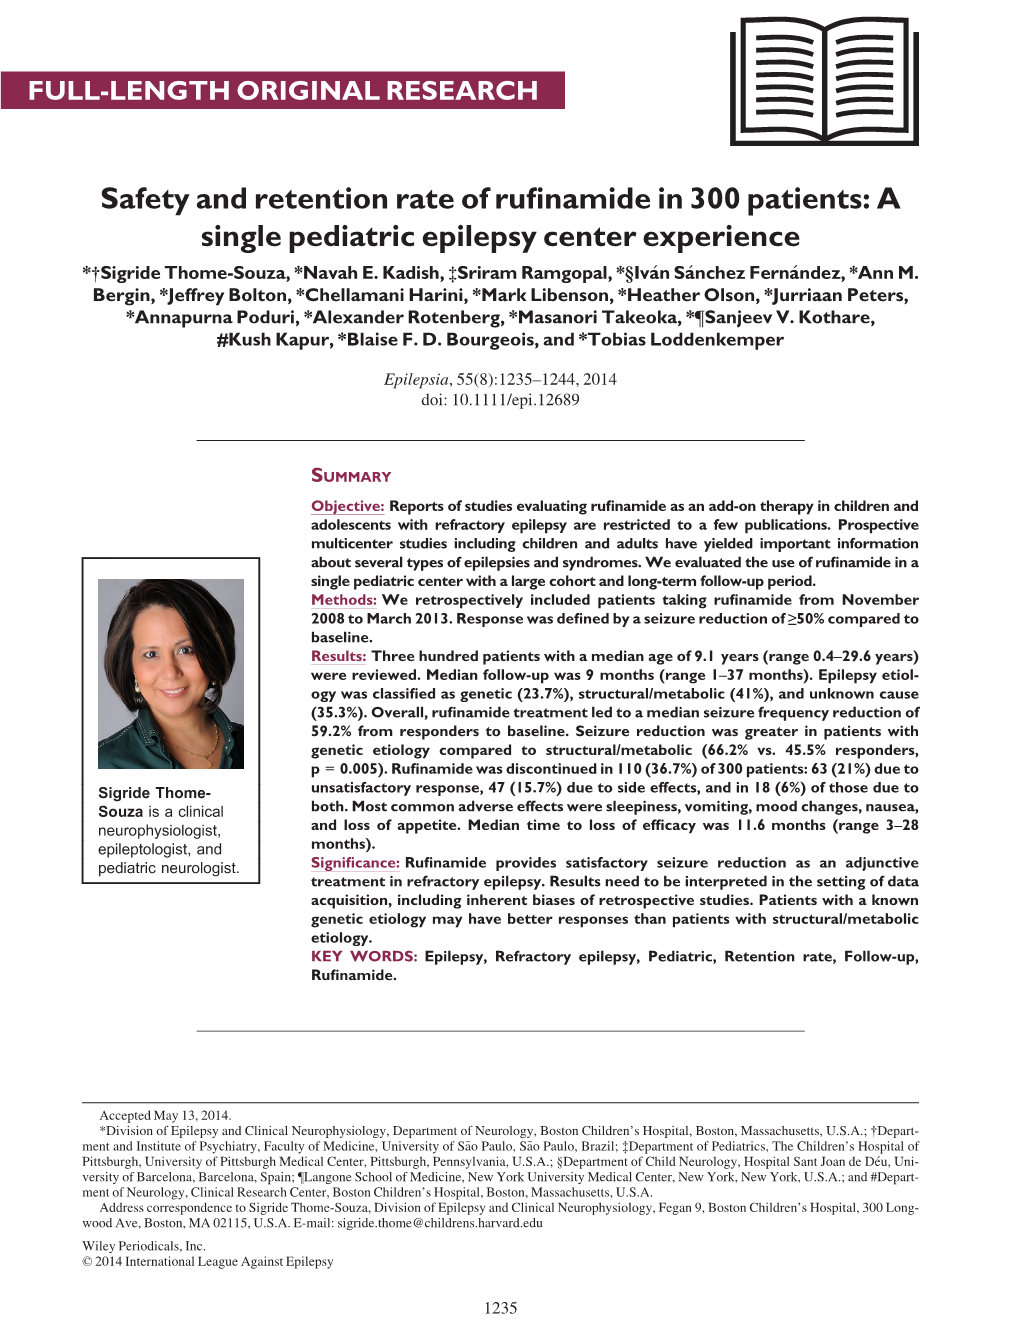 Safety and Retention Rate of Rufinamide in 300 Patients: a Single Pediatric